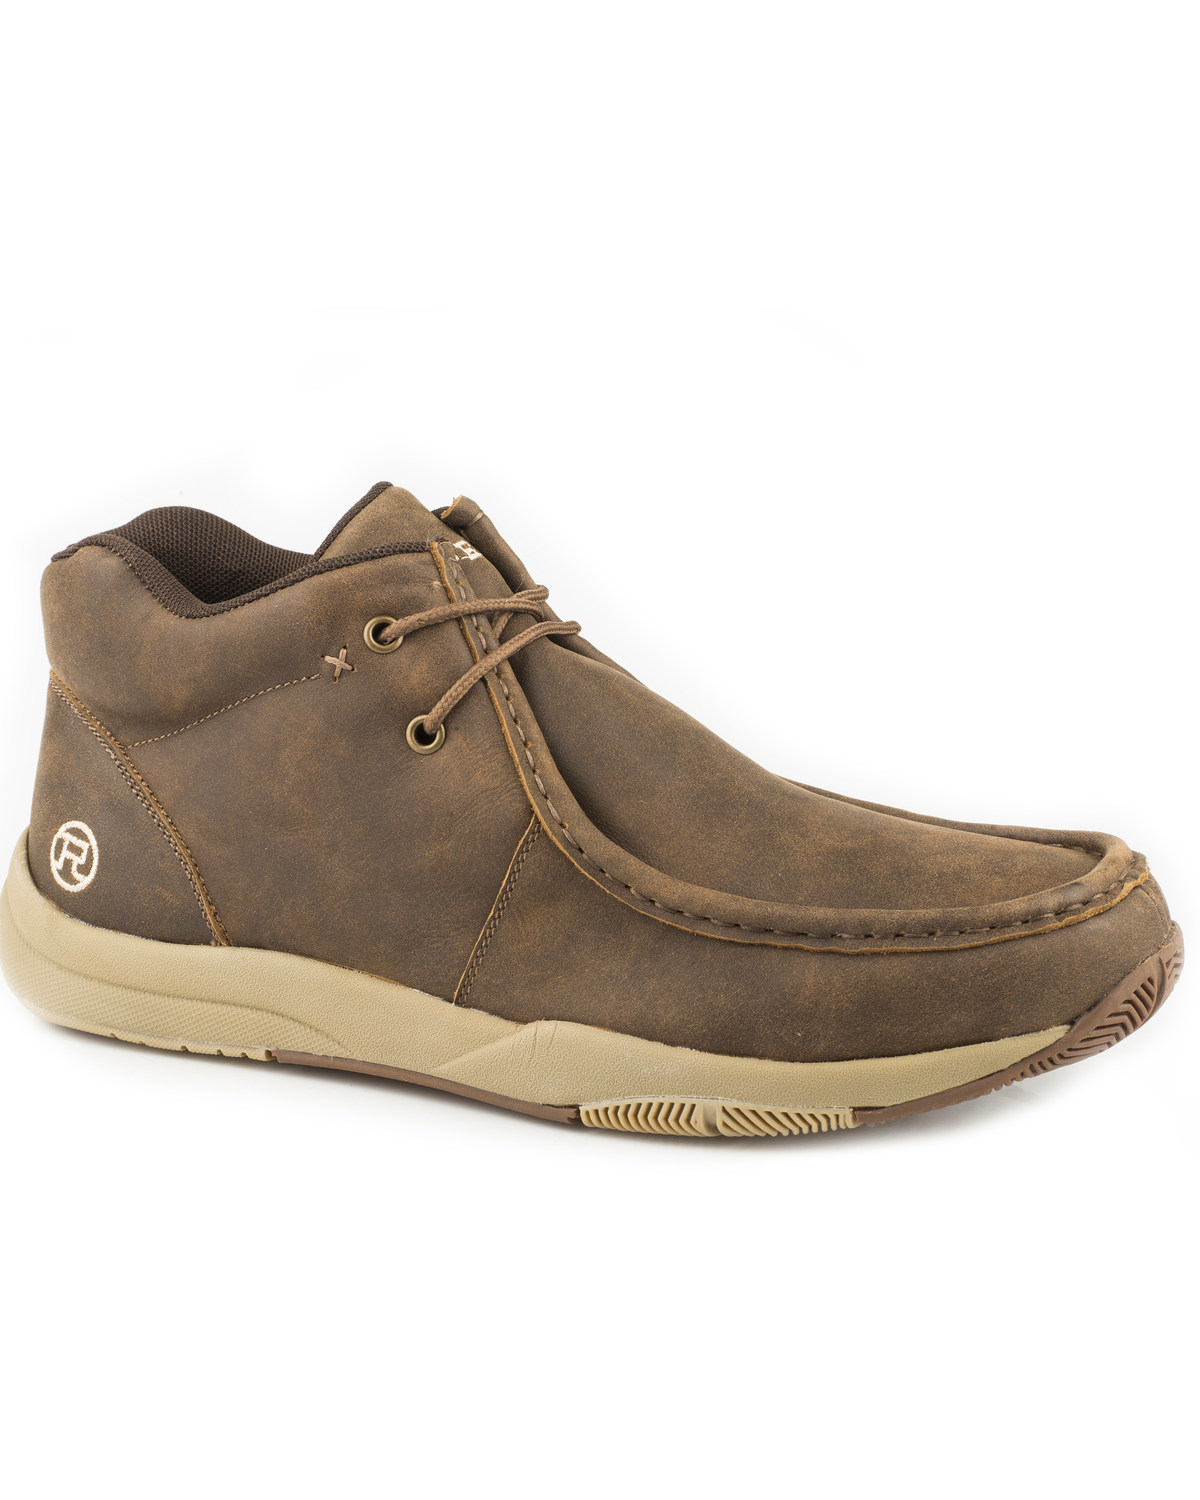 Roper Men's Clearcut Suede Leather 